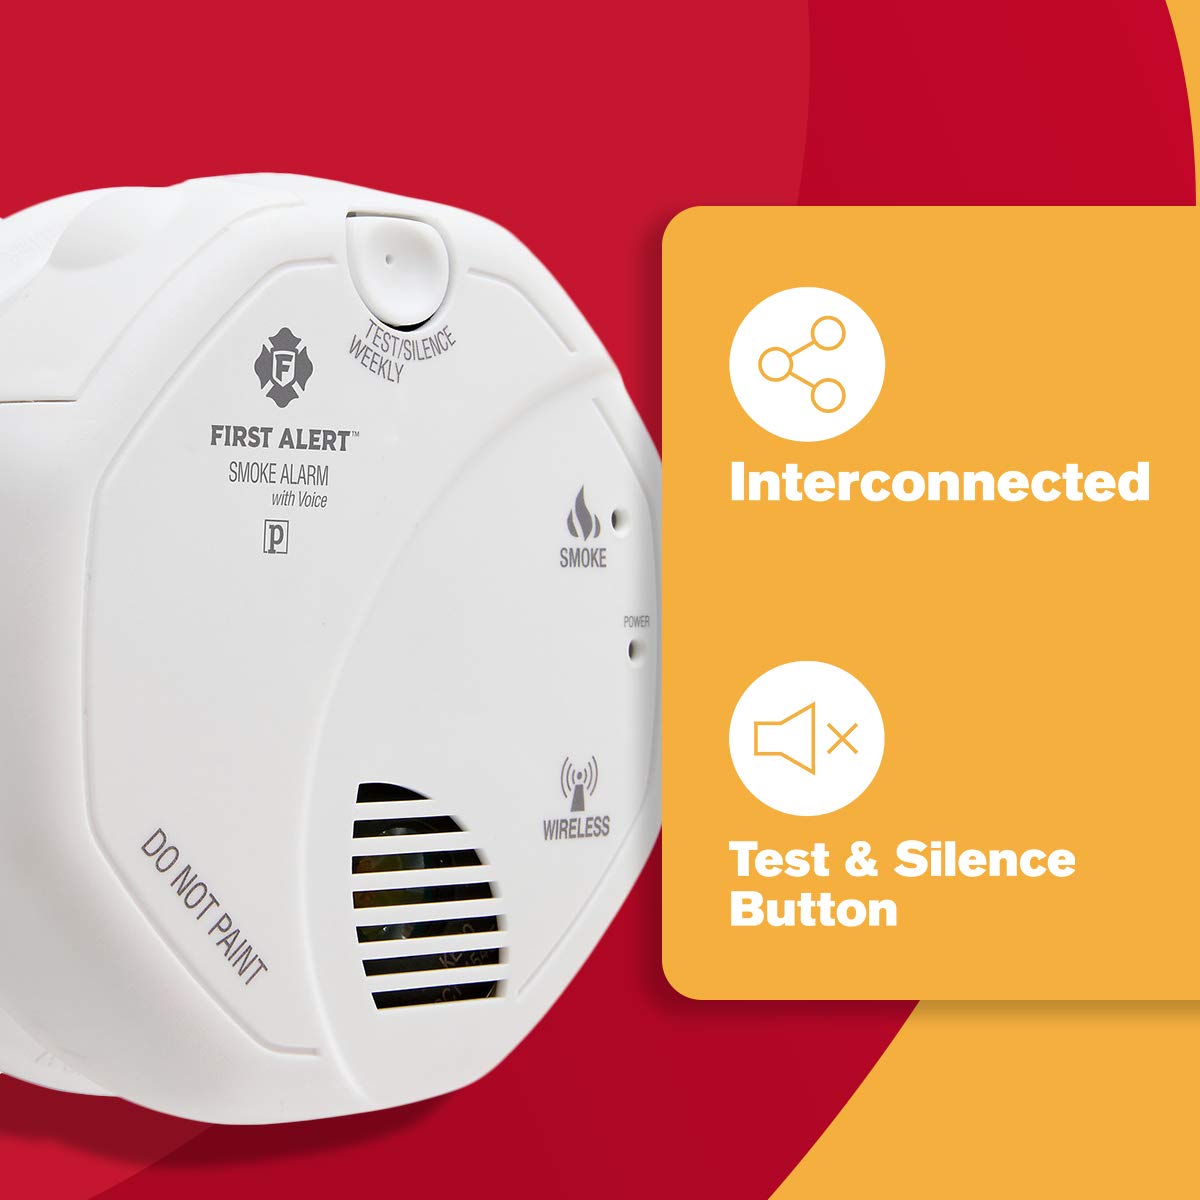 First Alert SA511CN2-3ST Wireless Interconnected Smoke Alarm with Voice Location, Battery Operated, 2 Pack